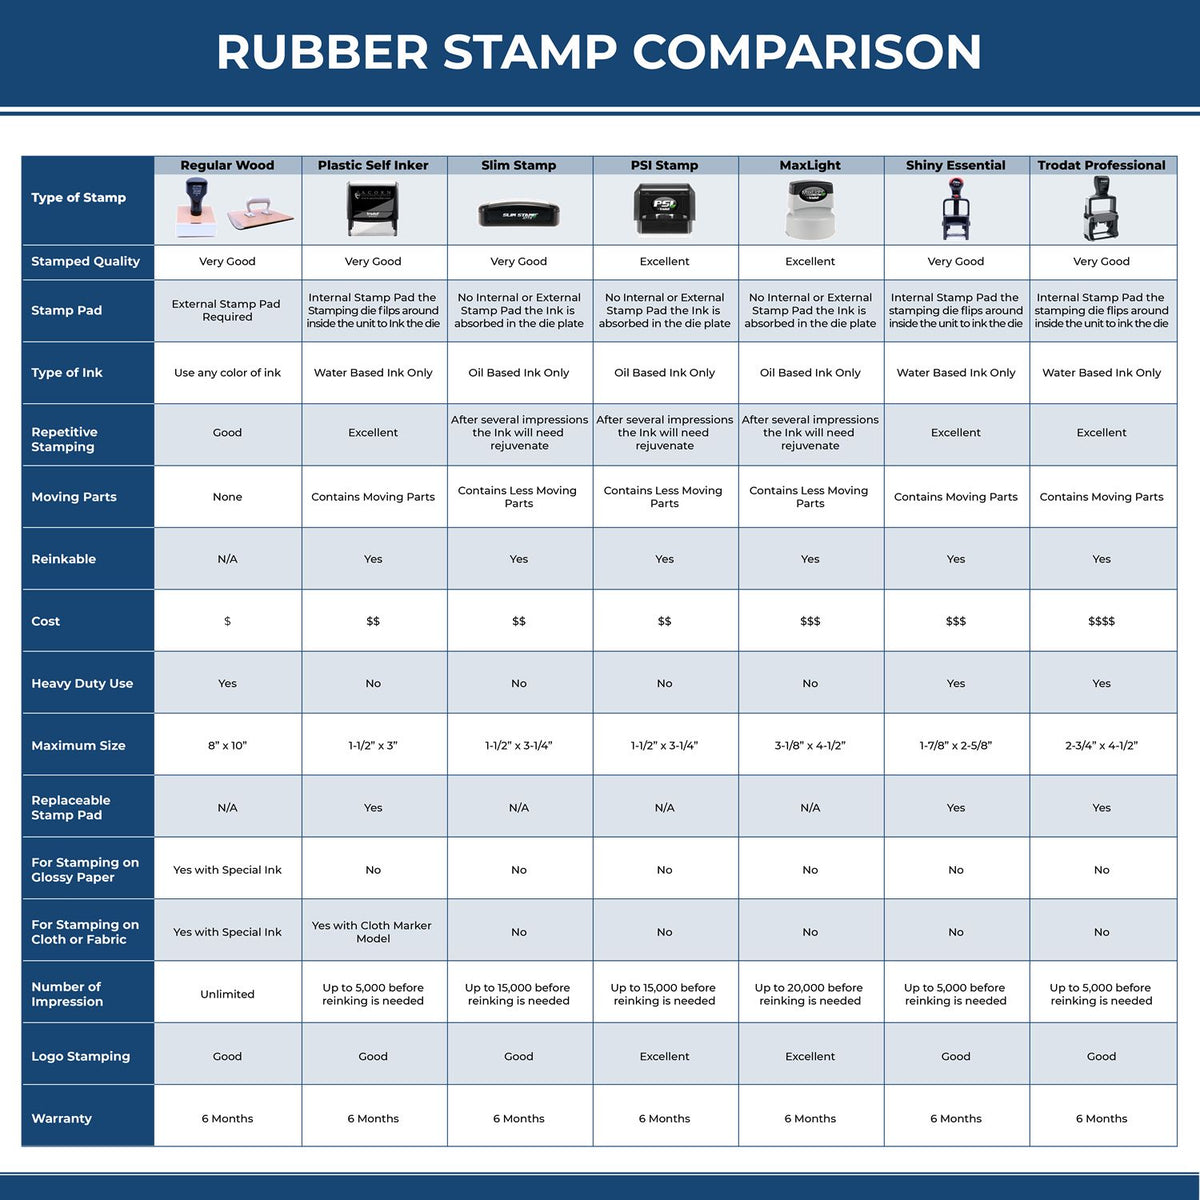 A comparison chart for the different types of mount models available for the Premium MaxLight Pre-Inked Maine Landscape Architectural Stamp.